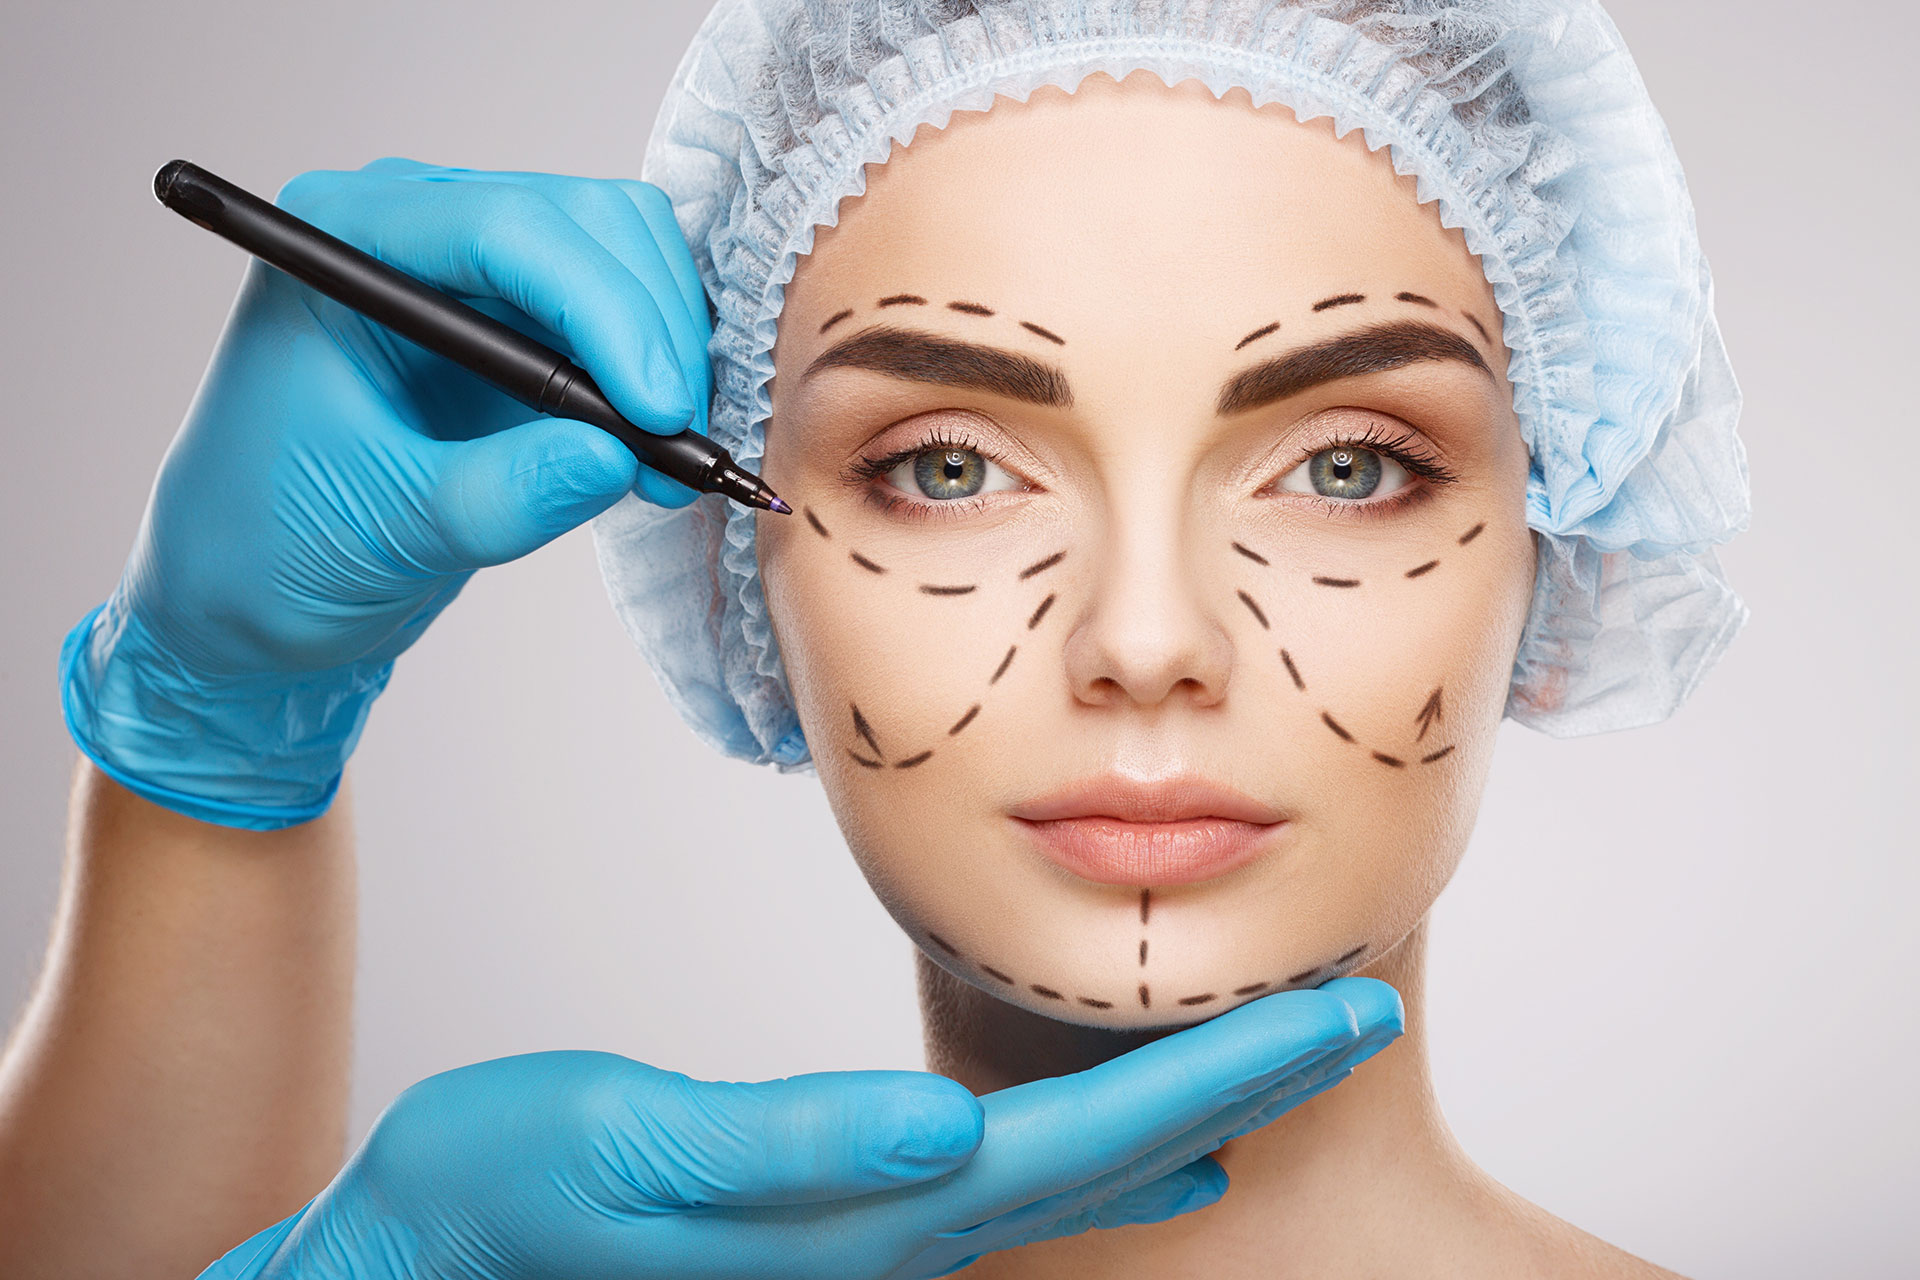 What are the Most Common Plastic Surgery Procedures in 2021 